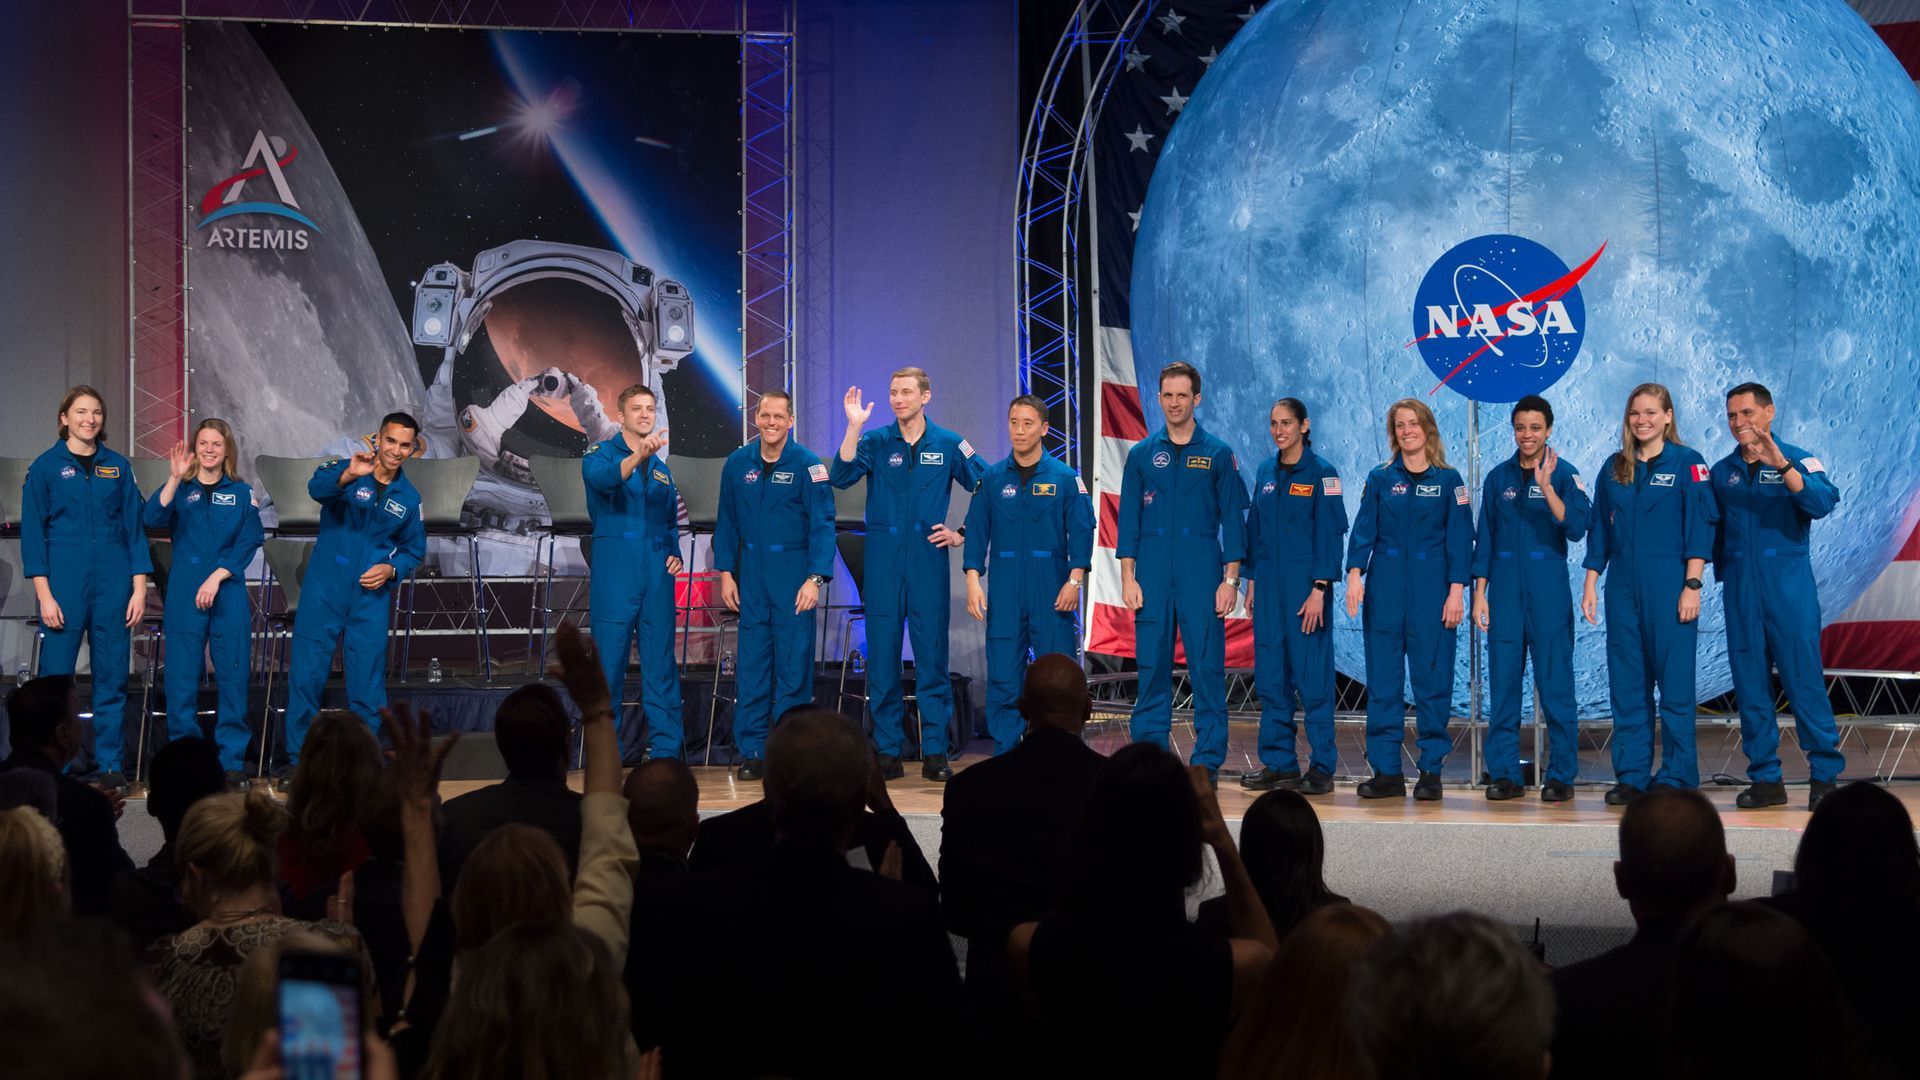 Members of the astronaut corps